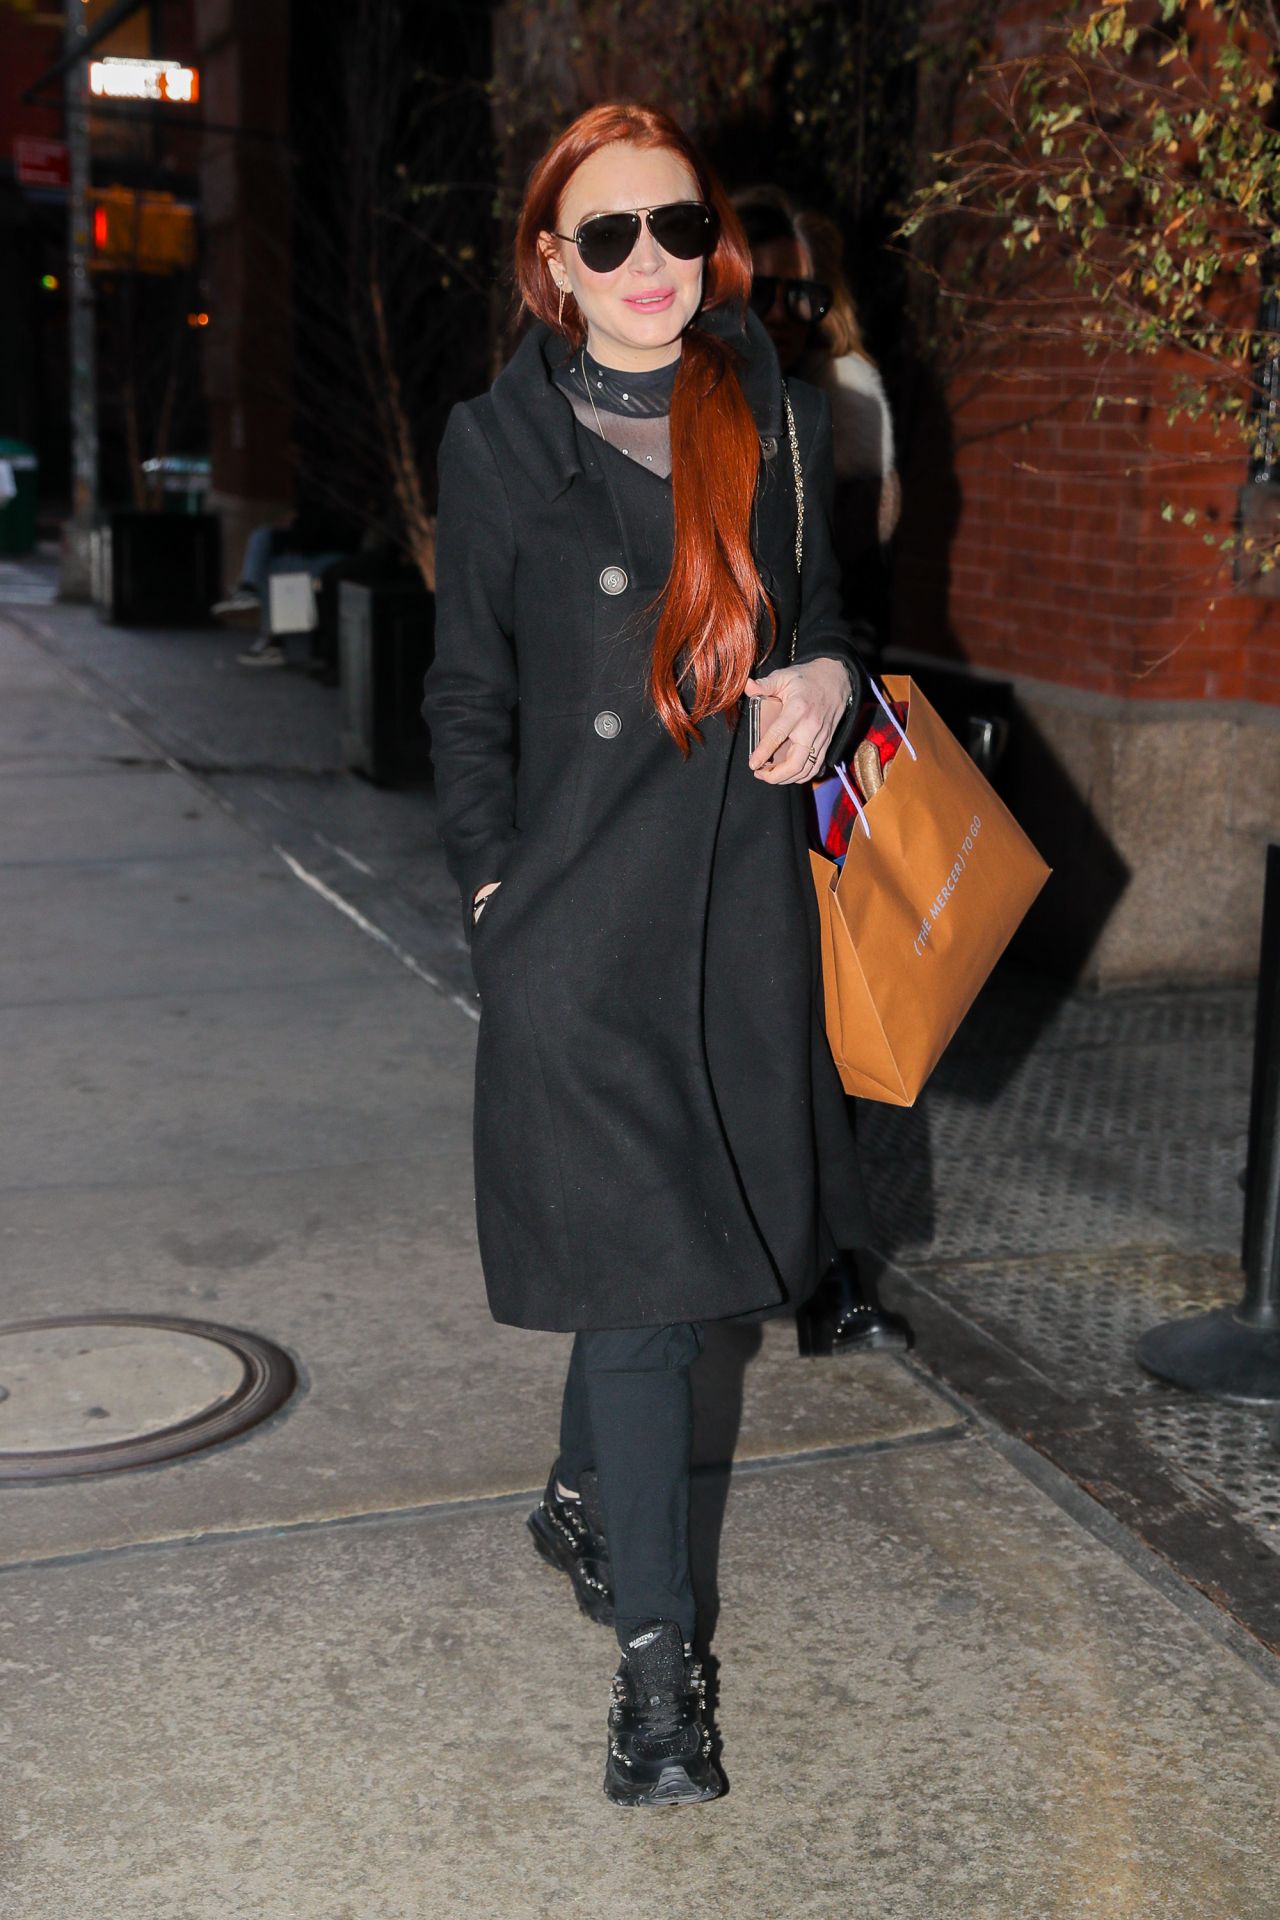 lindsay-lohan-night-out-in-new-york-01-02-2019-5.jpg